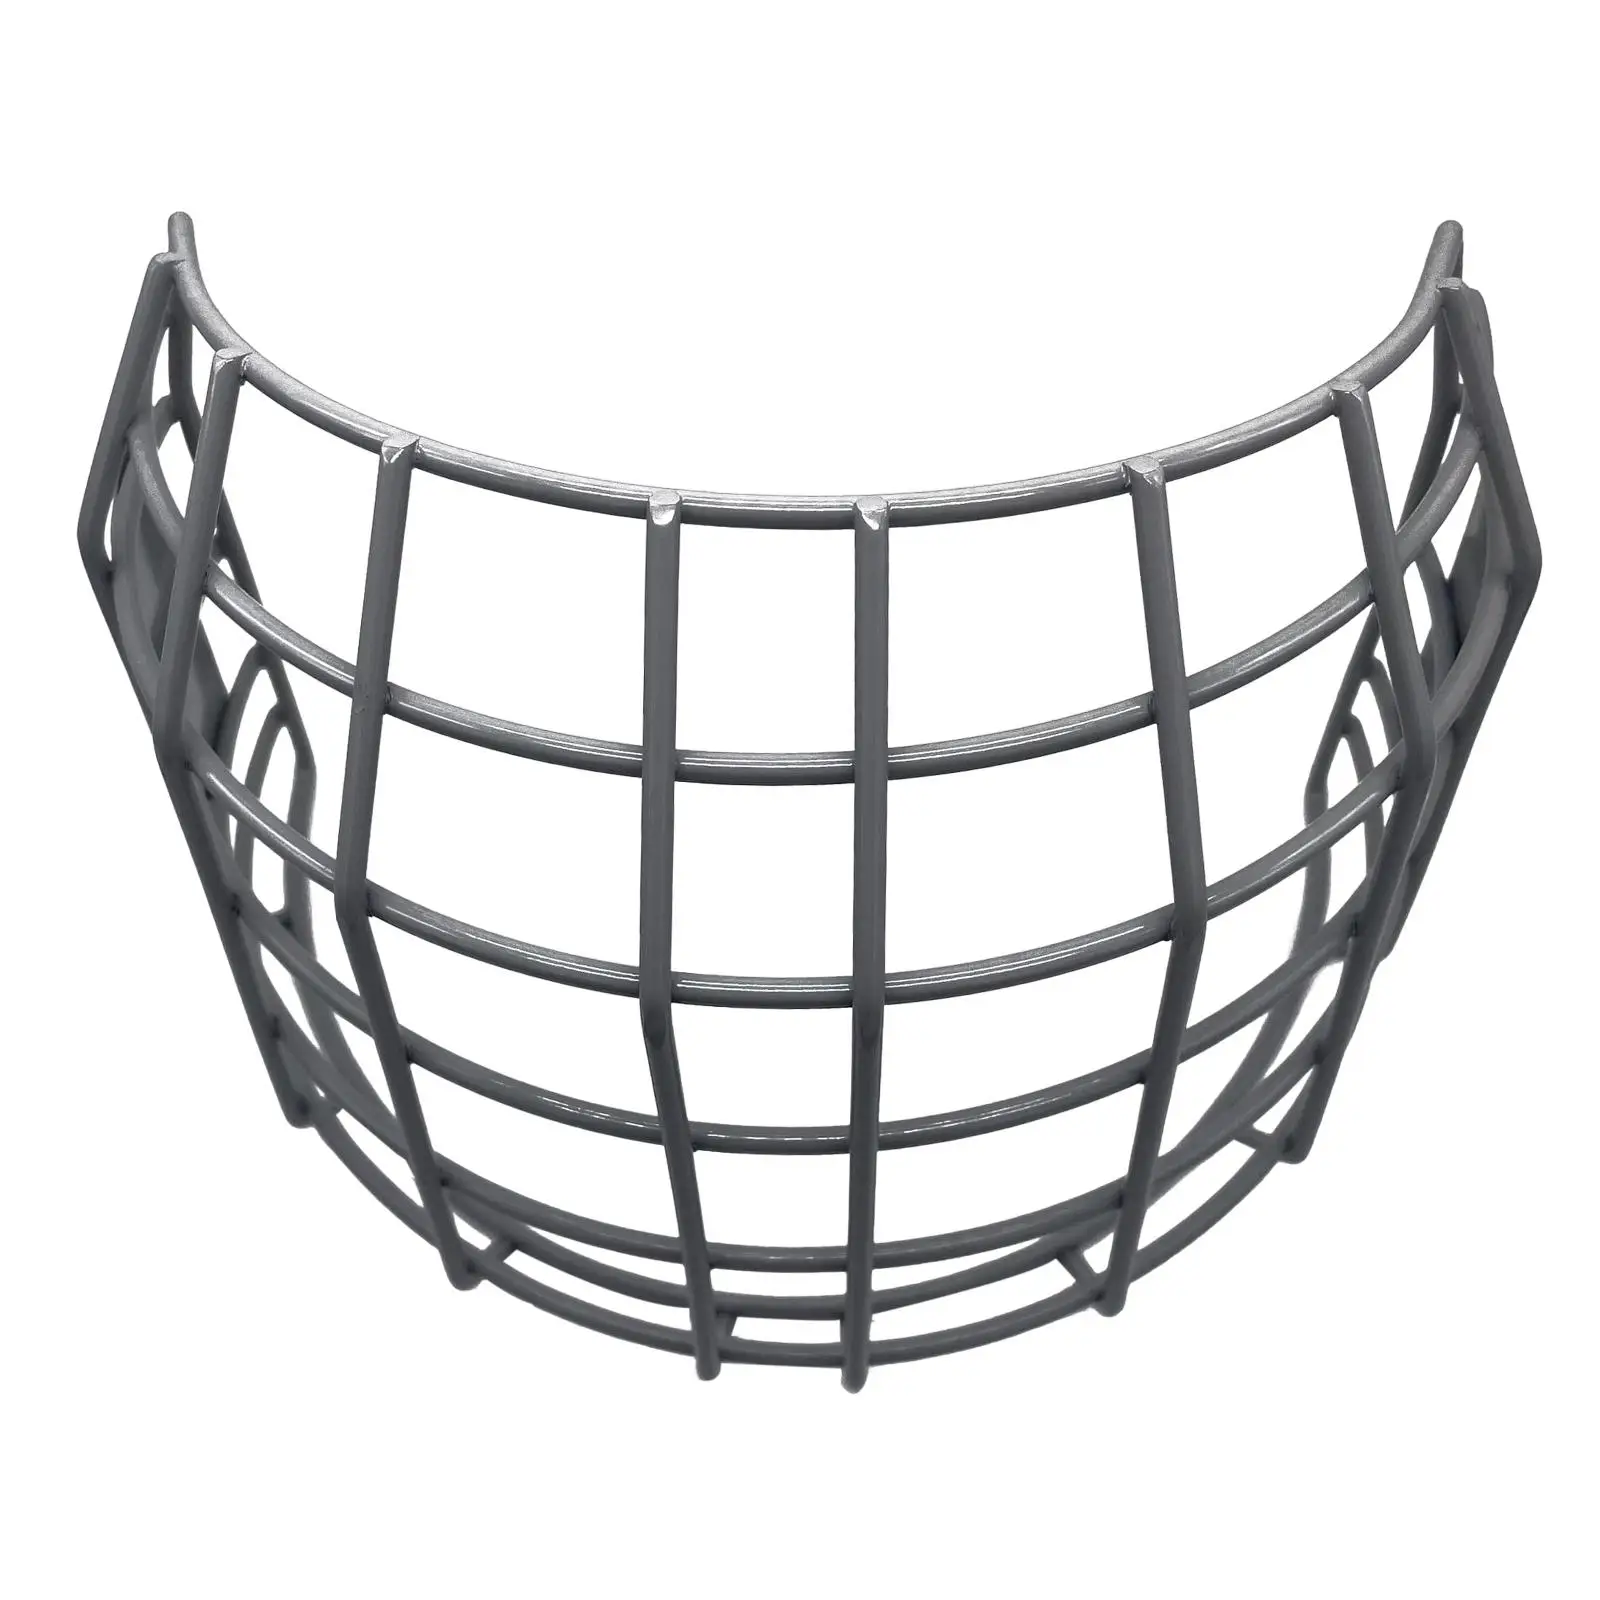 Batting Helmet Mask Outdoor Sport Protector Wire Face Protective Mask Baseball Face Guard for Teeball